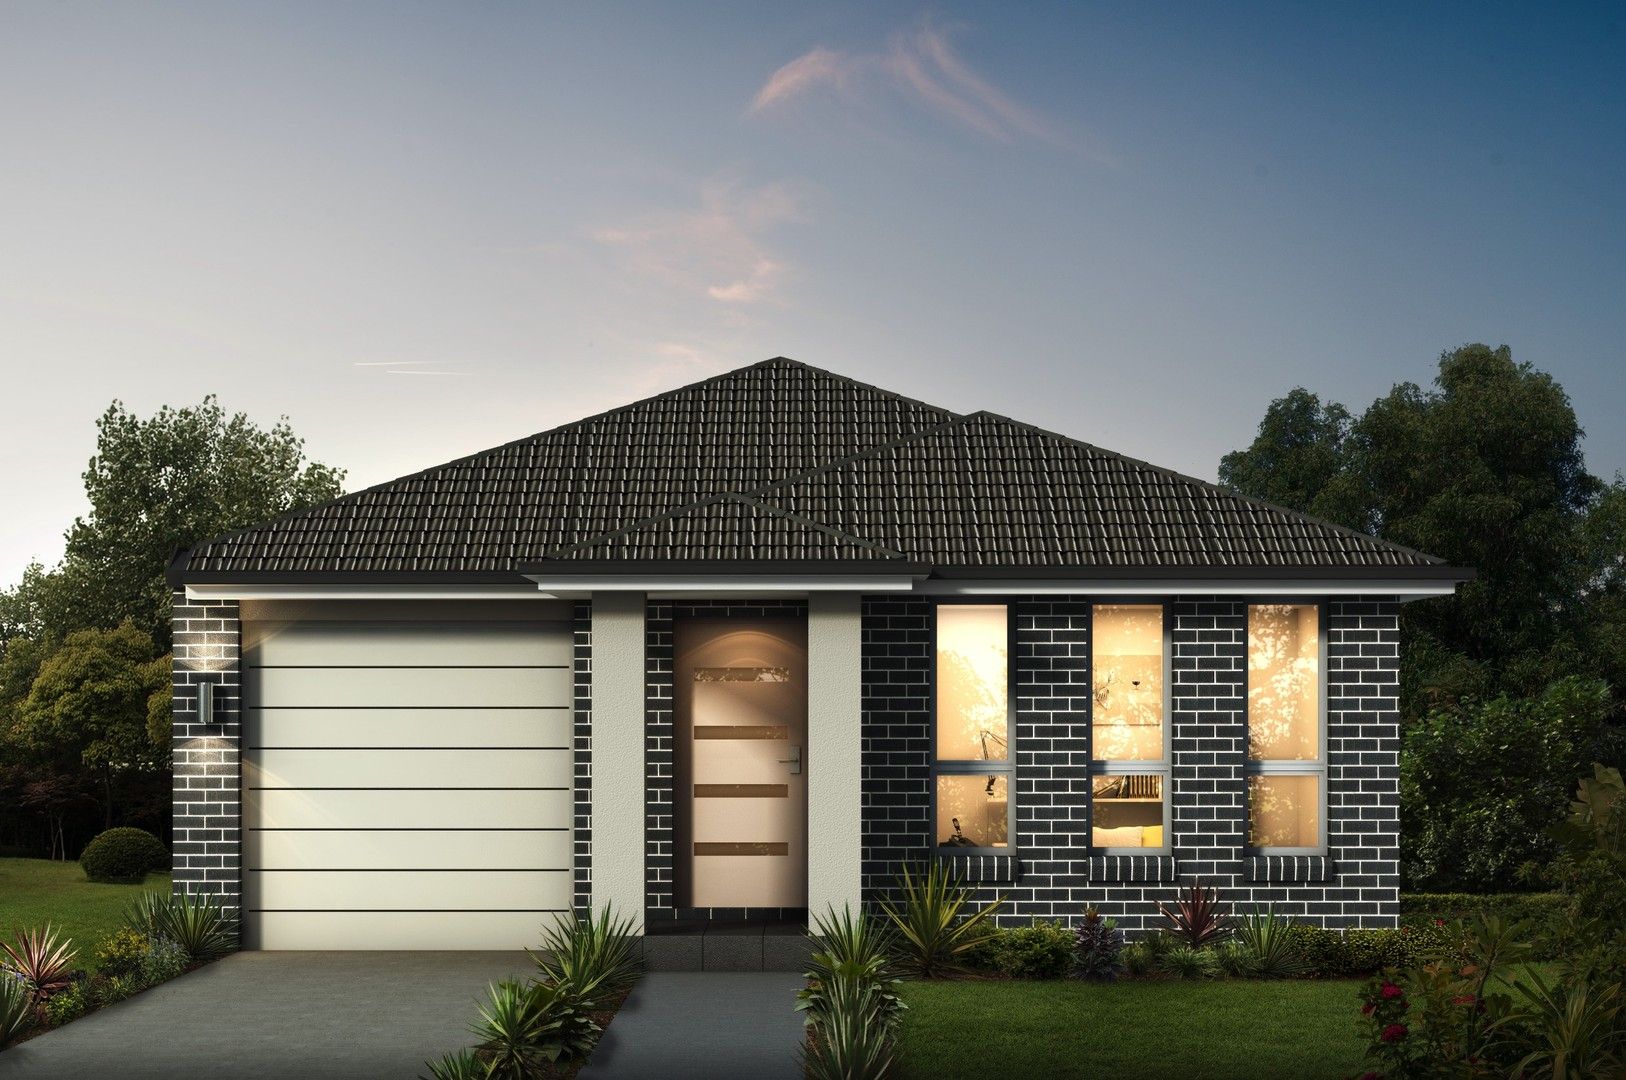 4 bedrooms New House & Land in Lot C Proposed road GLEDSWOOD HILLS NSW, 2557